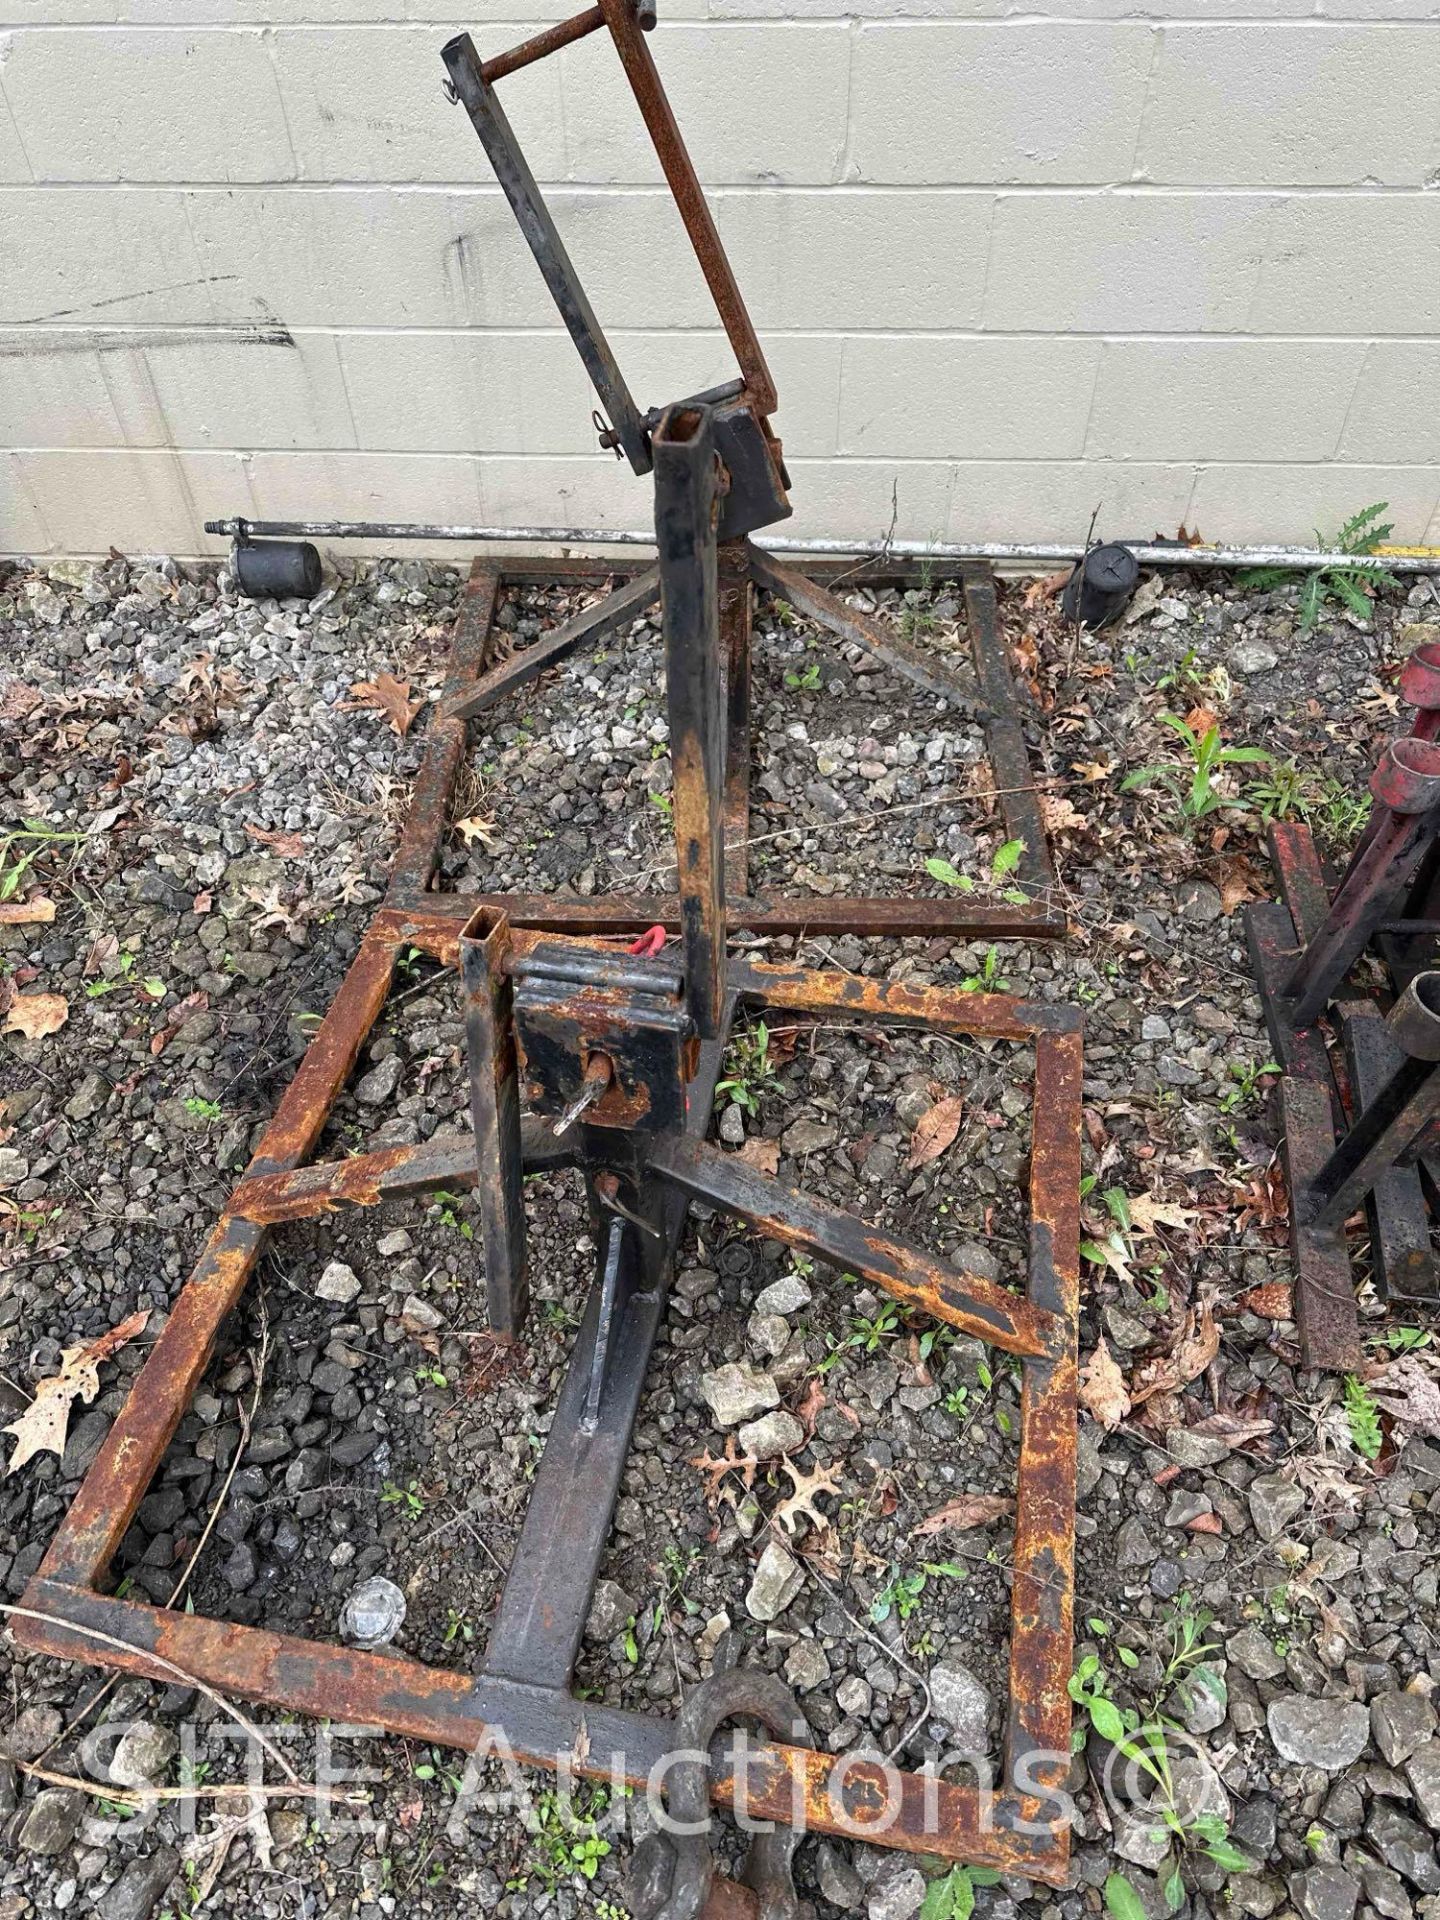 2 Wireline Sheave Stands